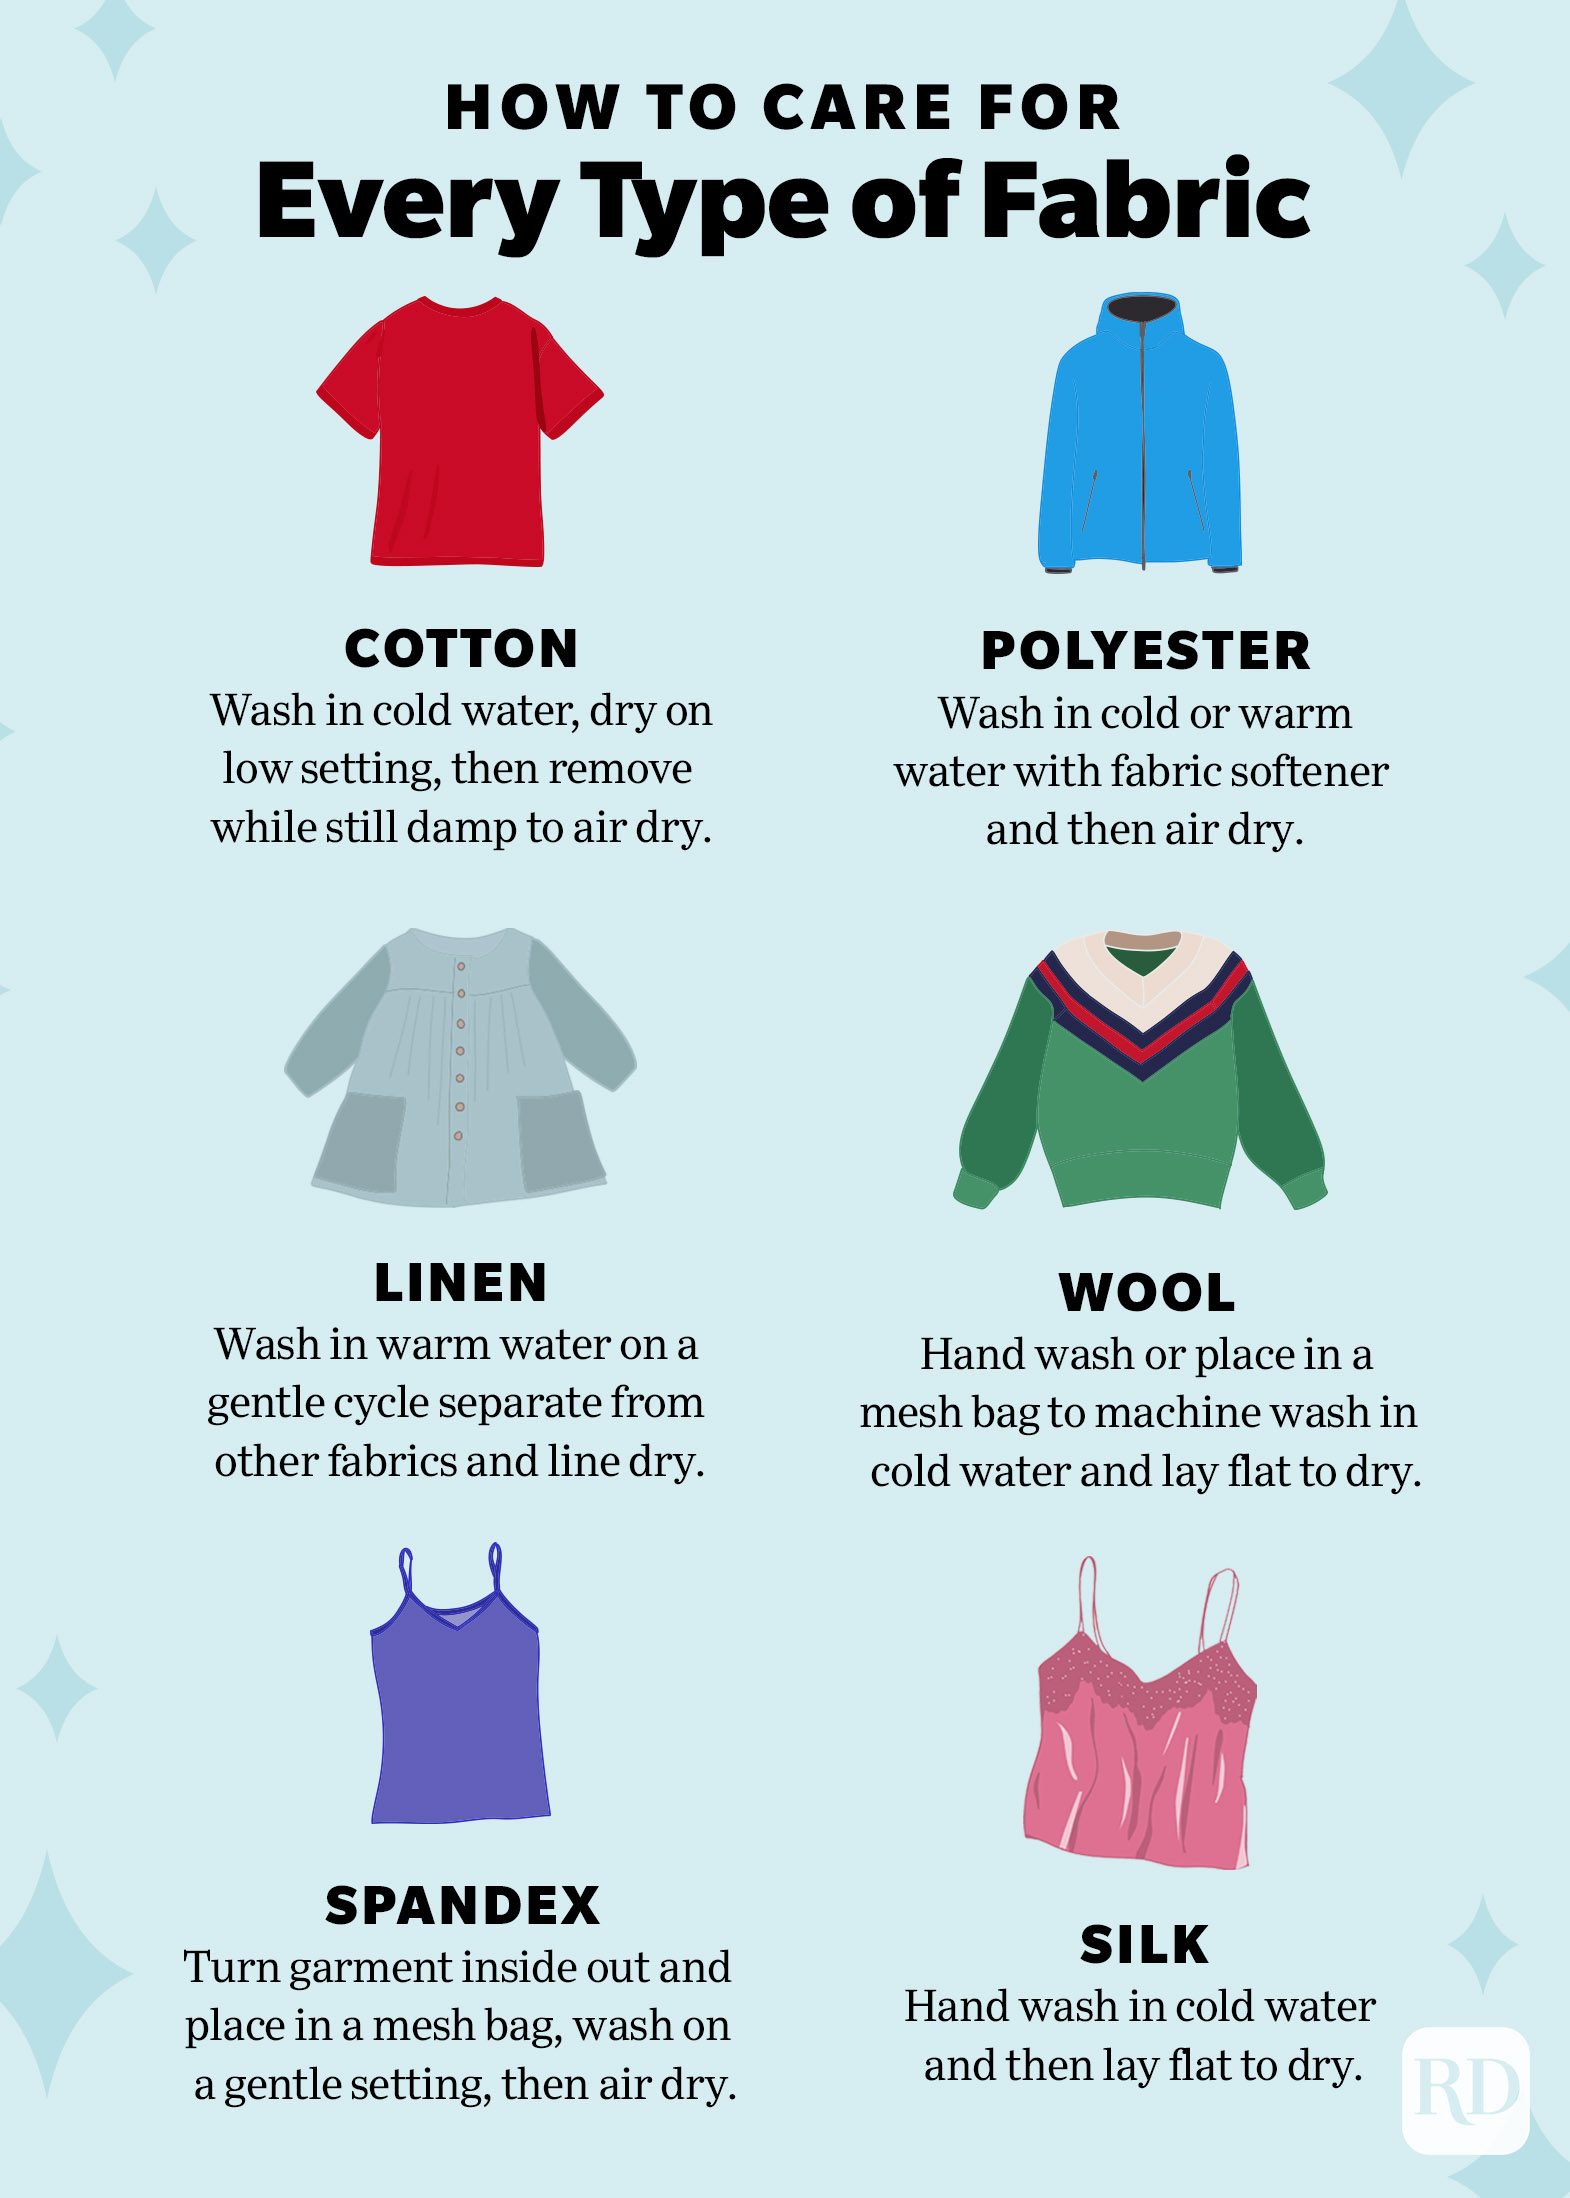 How to Wash Sheets the Right Way